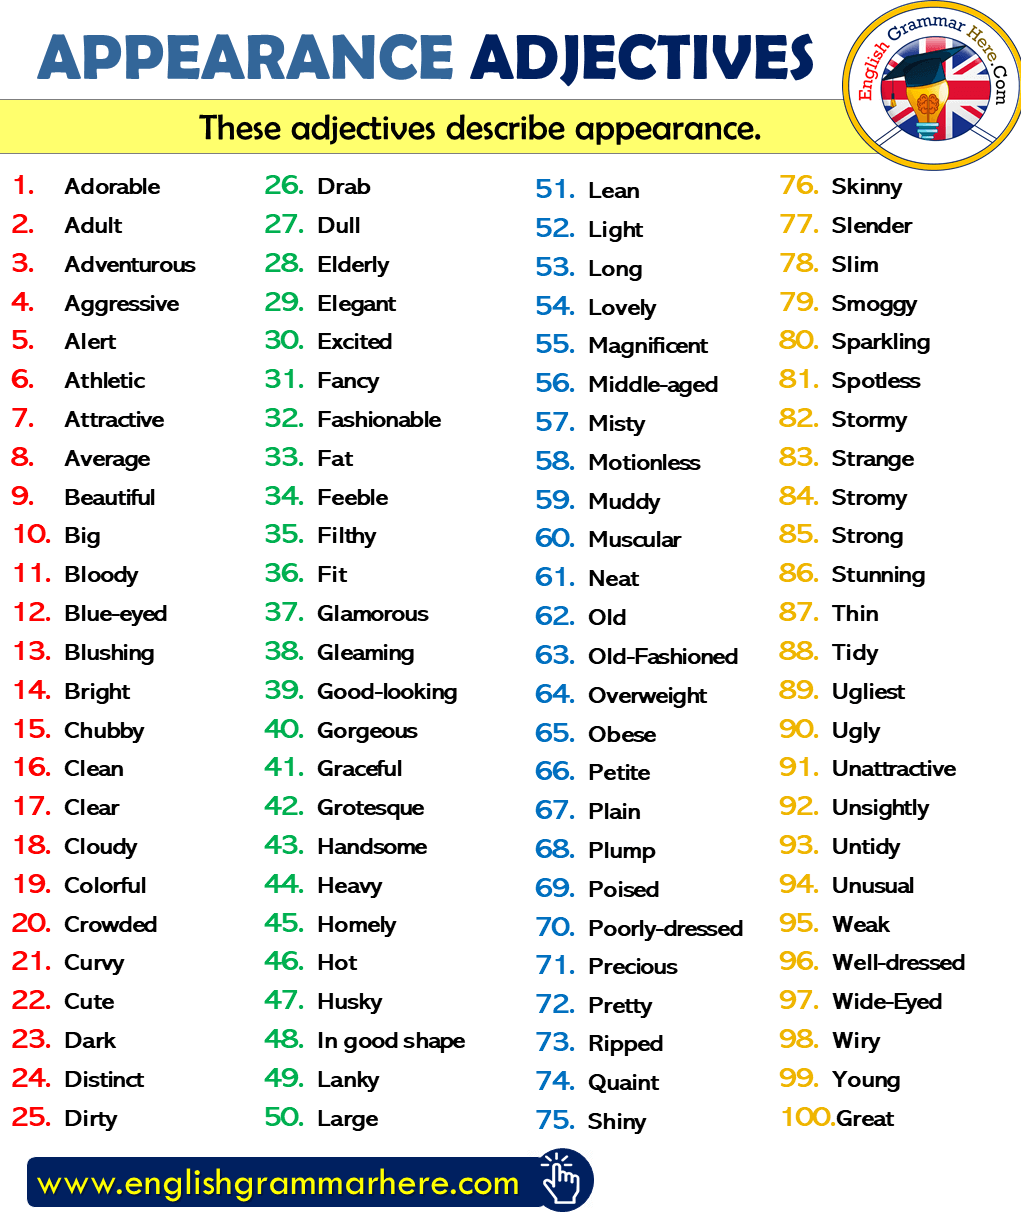 Appearance Adjectives List in English